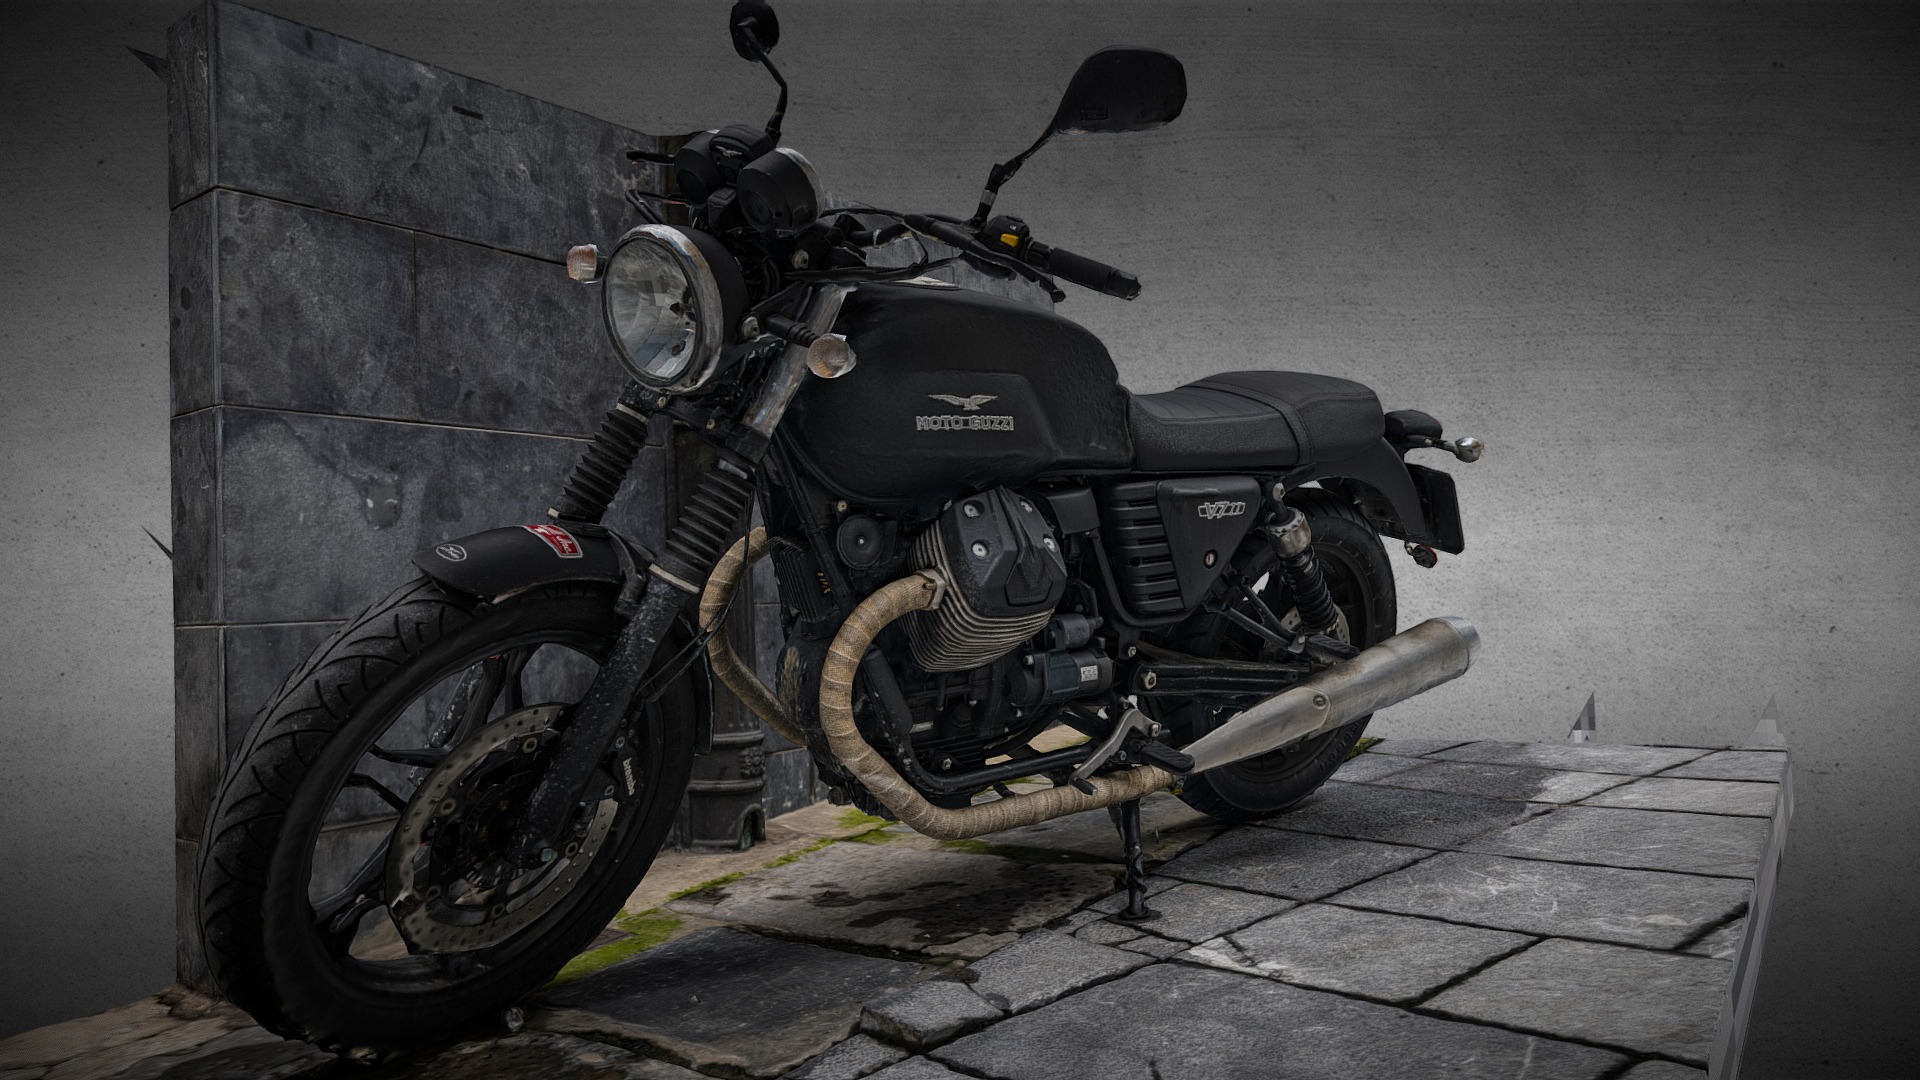 3D model Motorbike Guzzi v7 photogrammetry scan remake - This is a 3D model of the Motorbike Guzzi v7 photogrammetry scan remake. The 3D model is about a motorcycle parked in a garage.